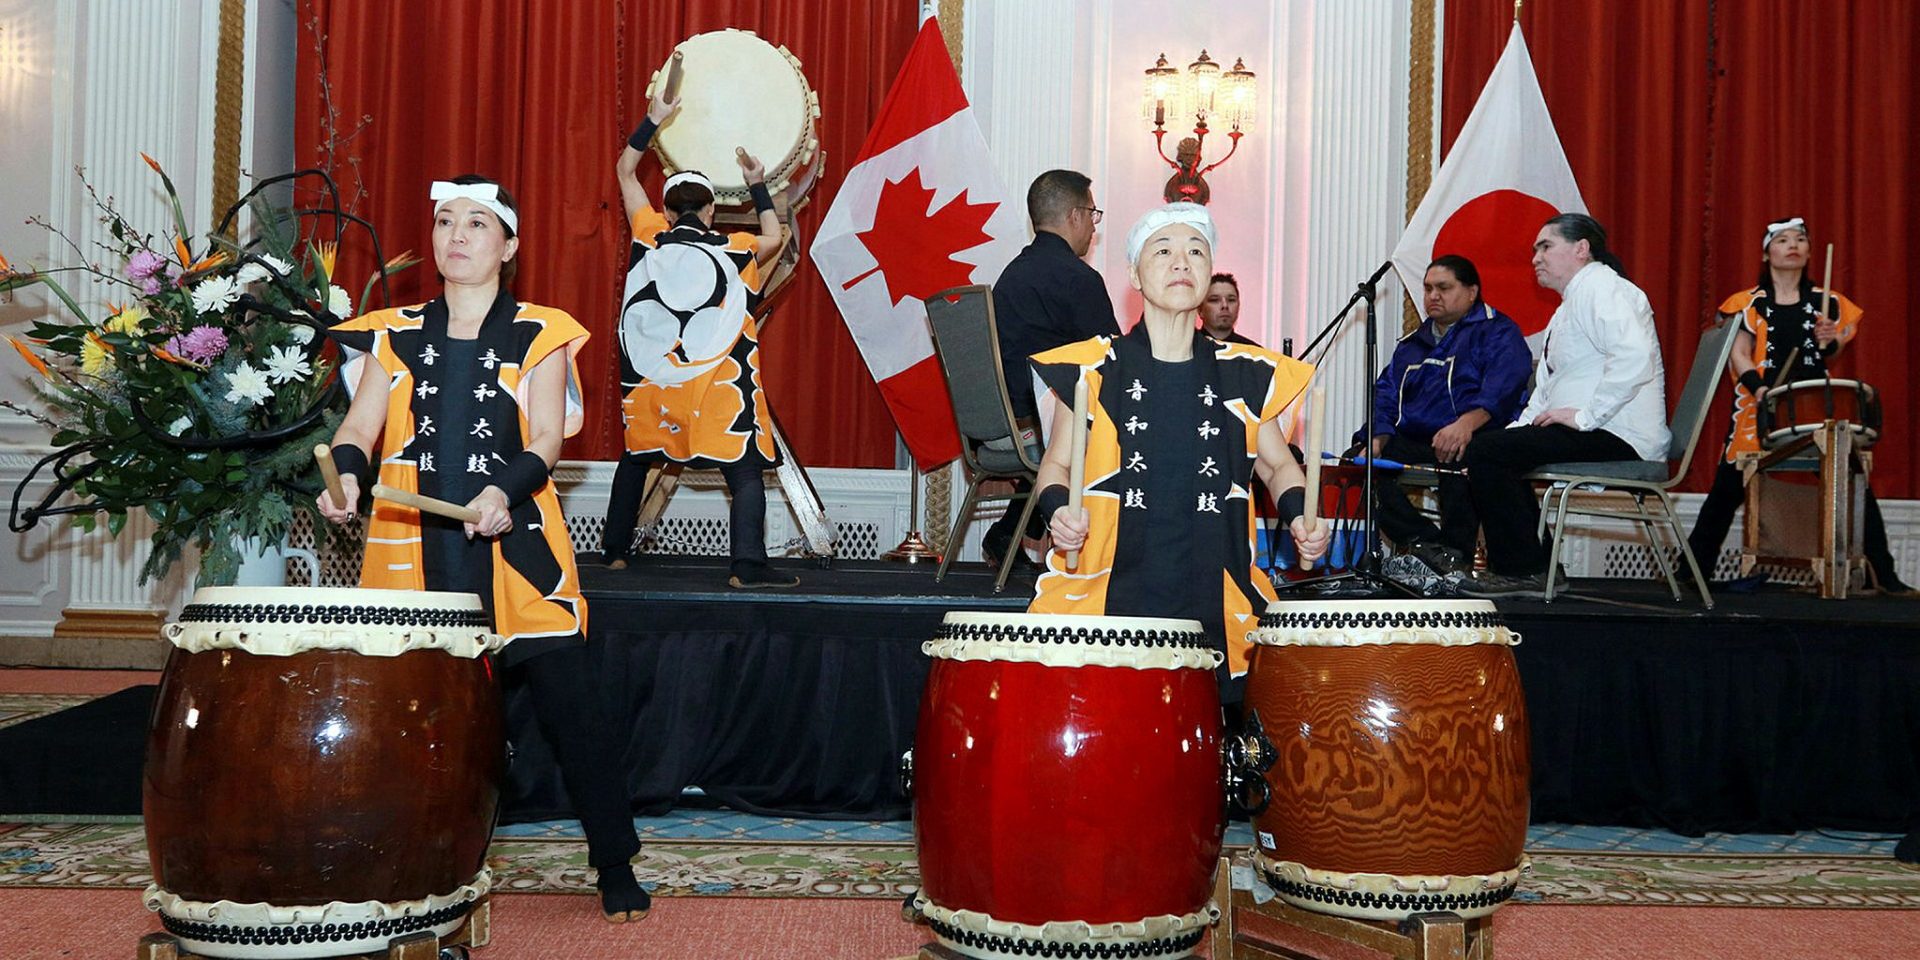 The drumming group Oto-Wa Taiko performs at the Château Laurier on Feb.13 during a party celebrating Japan’s national day and the Japanese emperor’s birthday.  Sam Garcia